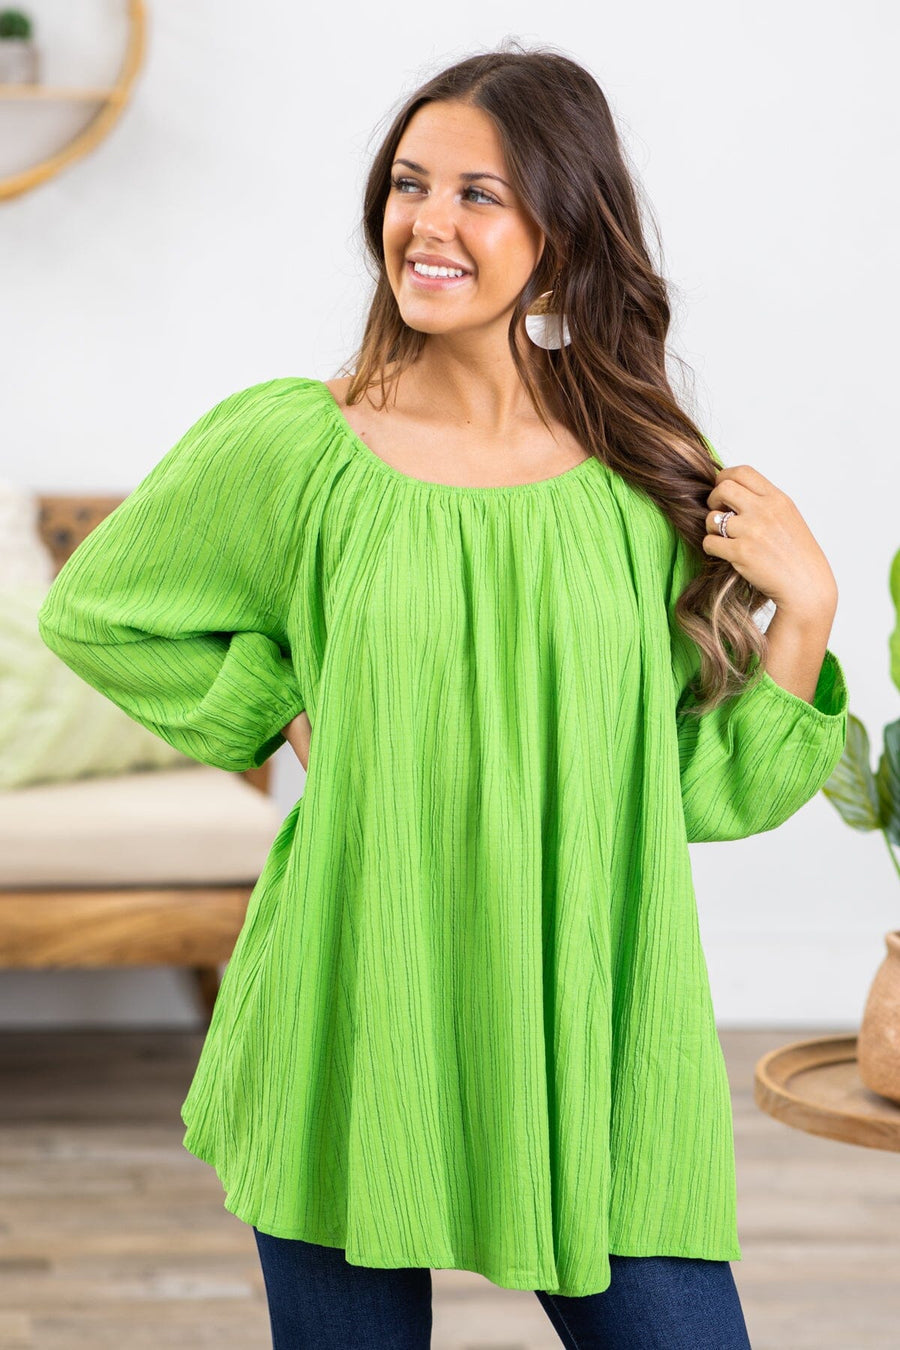 Lime Green Elastic Trim Textured Top - Filly Flair